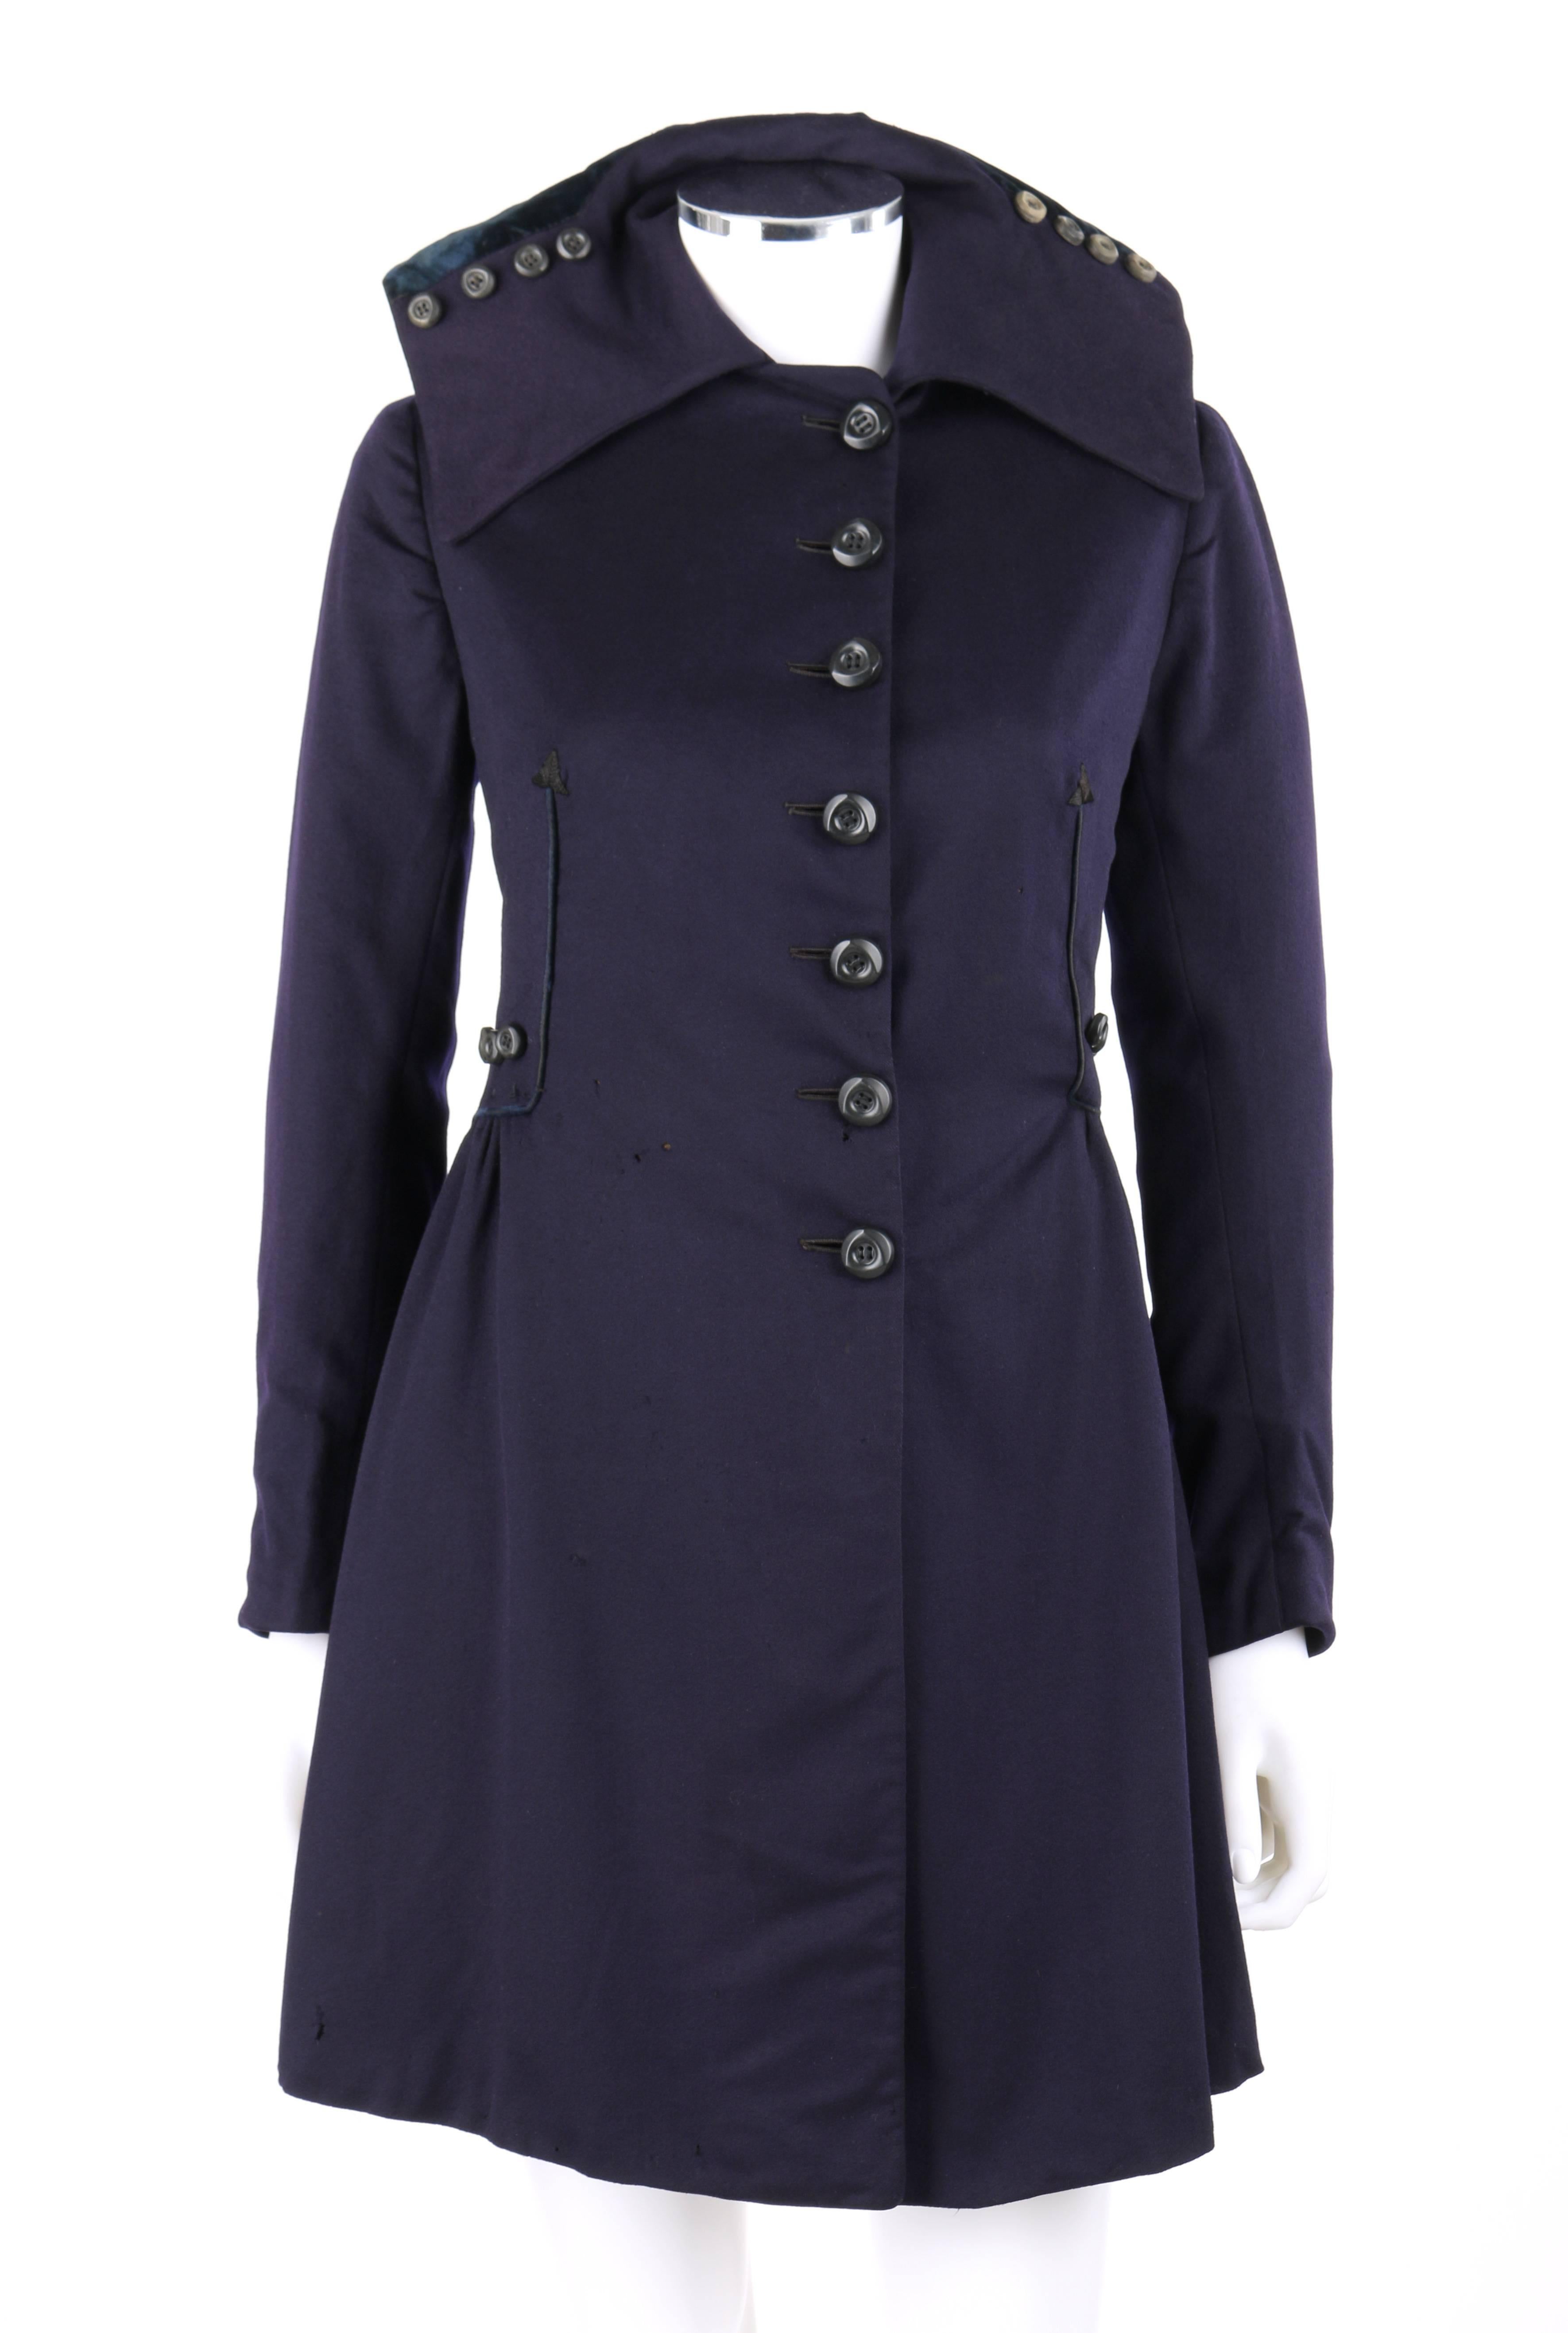 Vintage Edwardian couture c.1910's navy blue wool military-cut walking coat. Wide flat collar with four button detail on either side and flounced dark teal blue silk velvet at back. Seven side front button closures from neckline to hips. Long